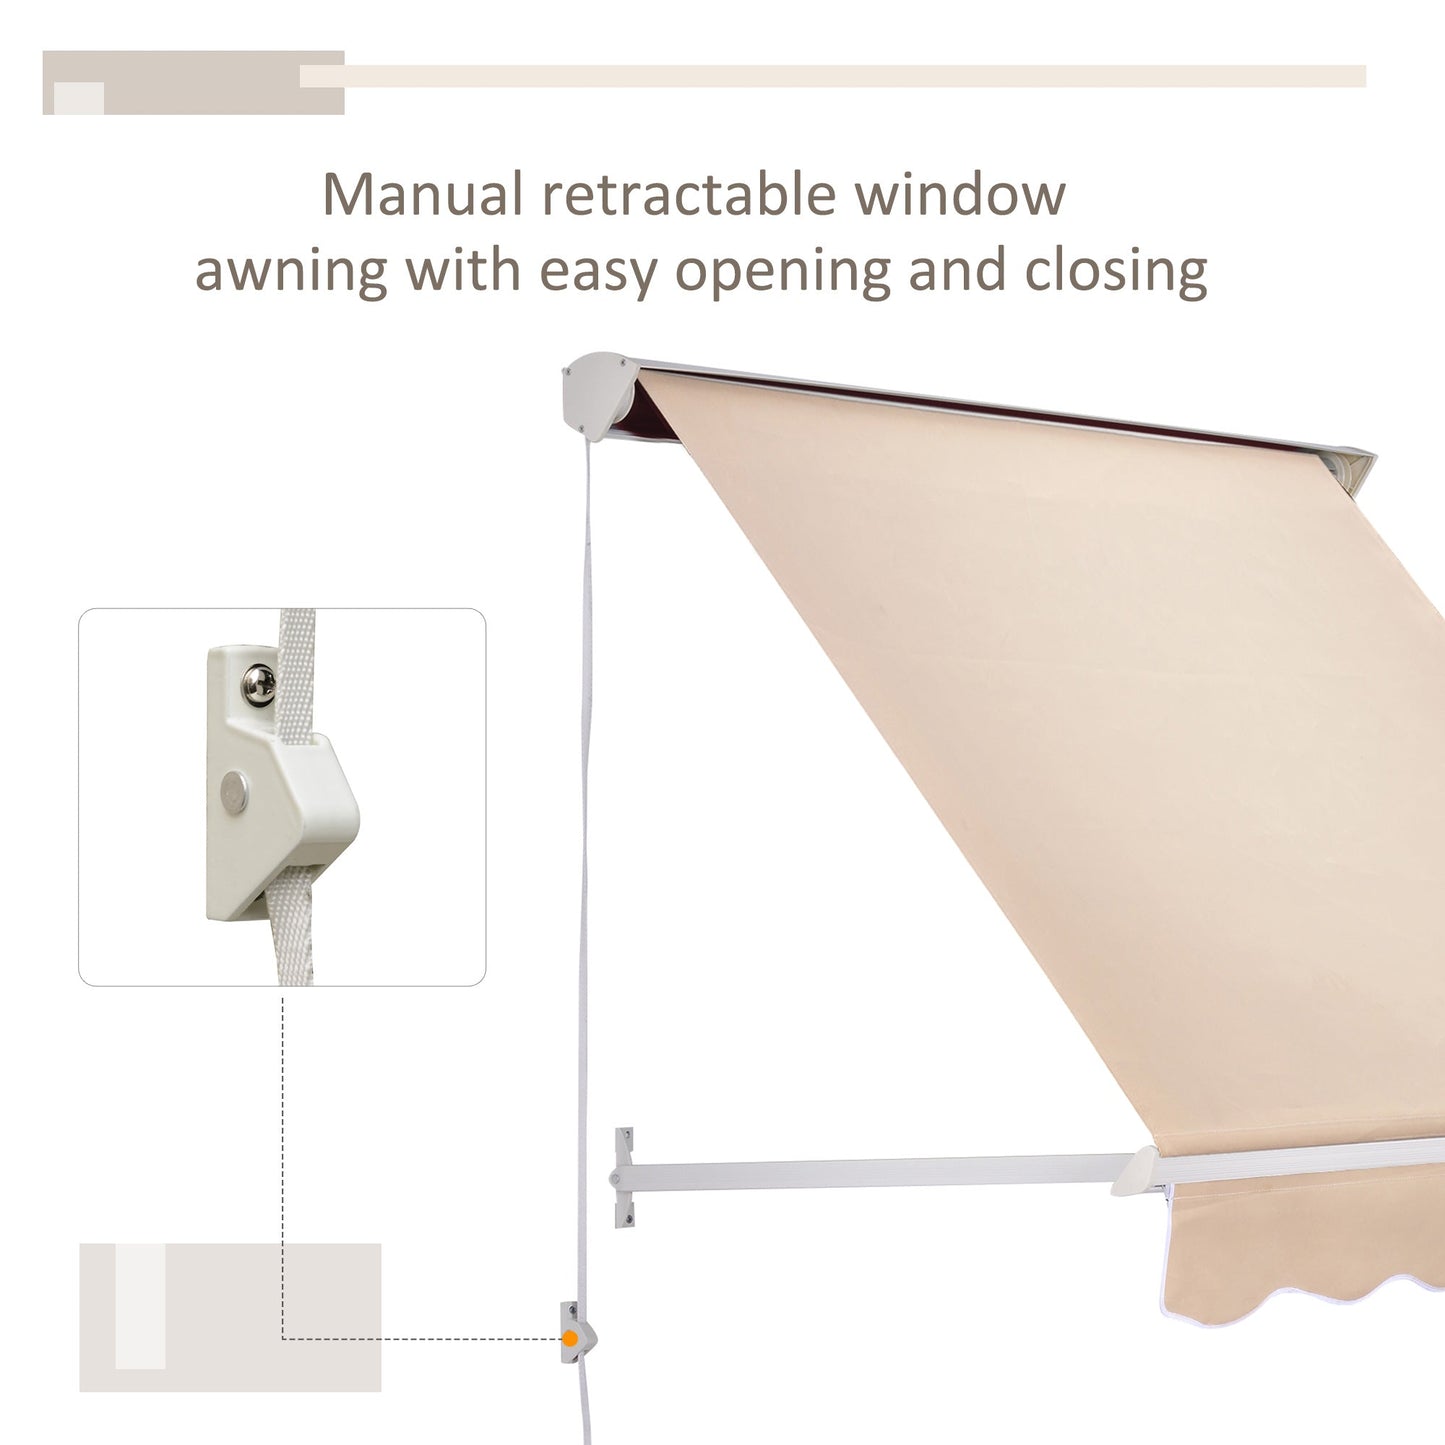 -Outsunny 6' Drop Arm Manual Retractable Patio Sun Window Awning with UV & Sun Protection & Included Hardware Cream - Outdoor Style Company